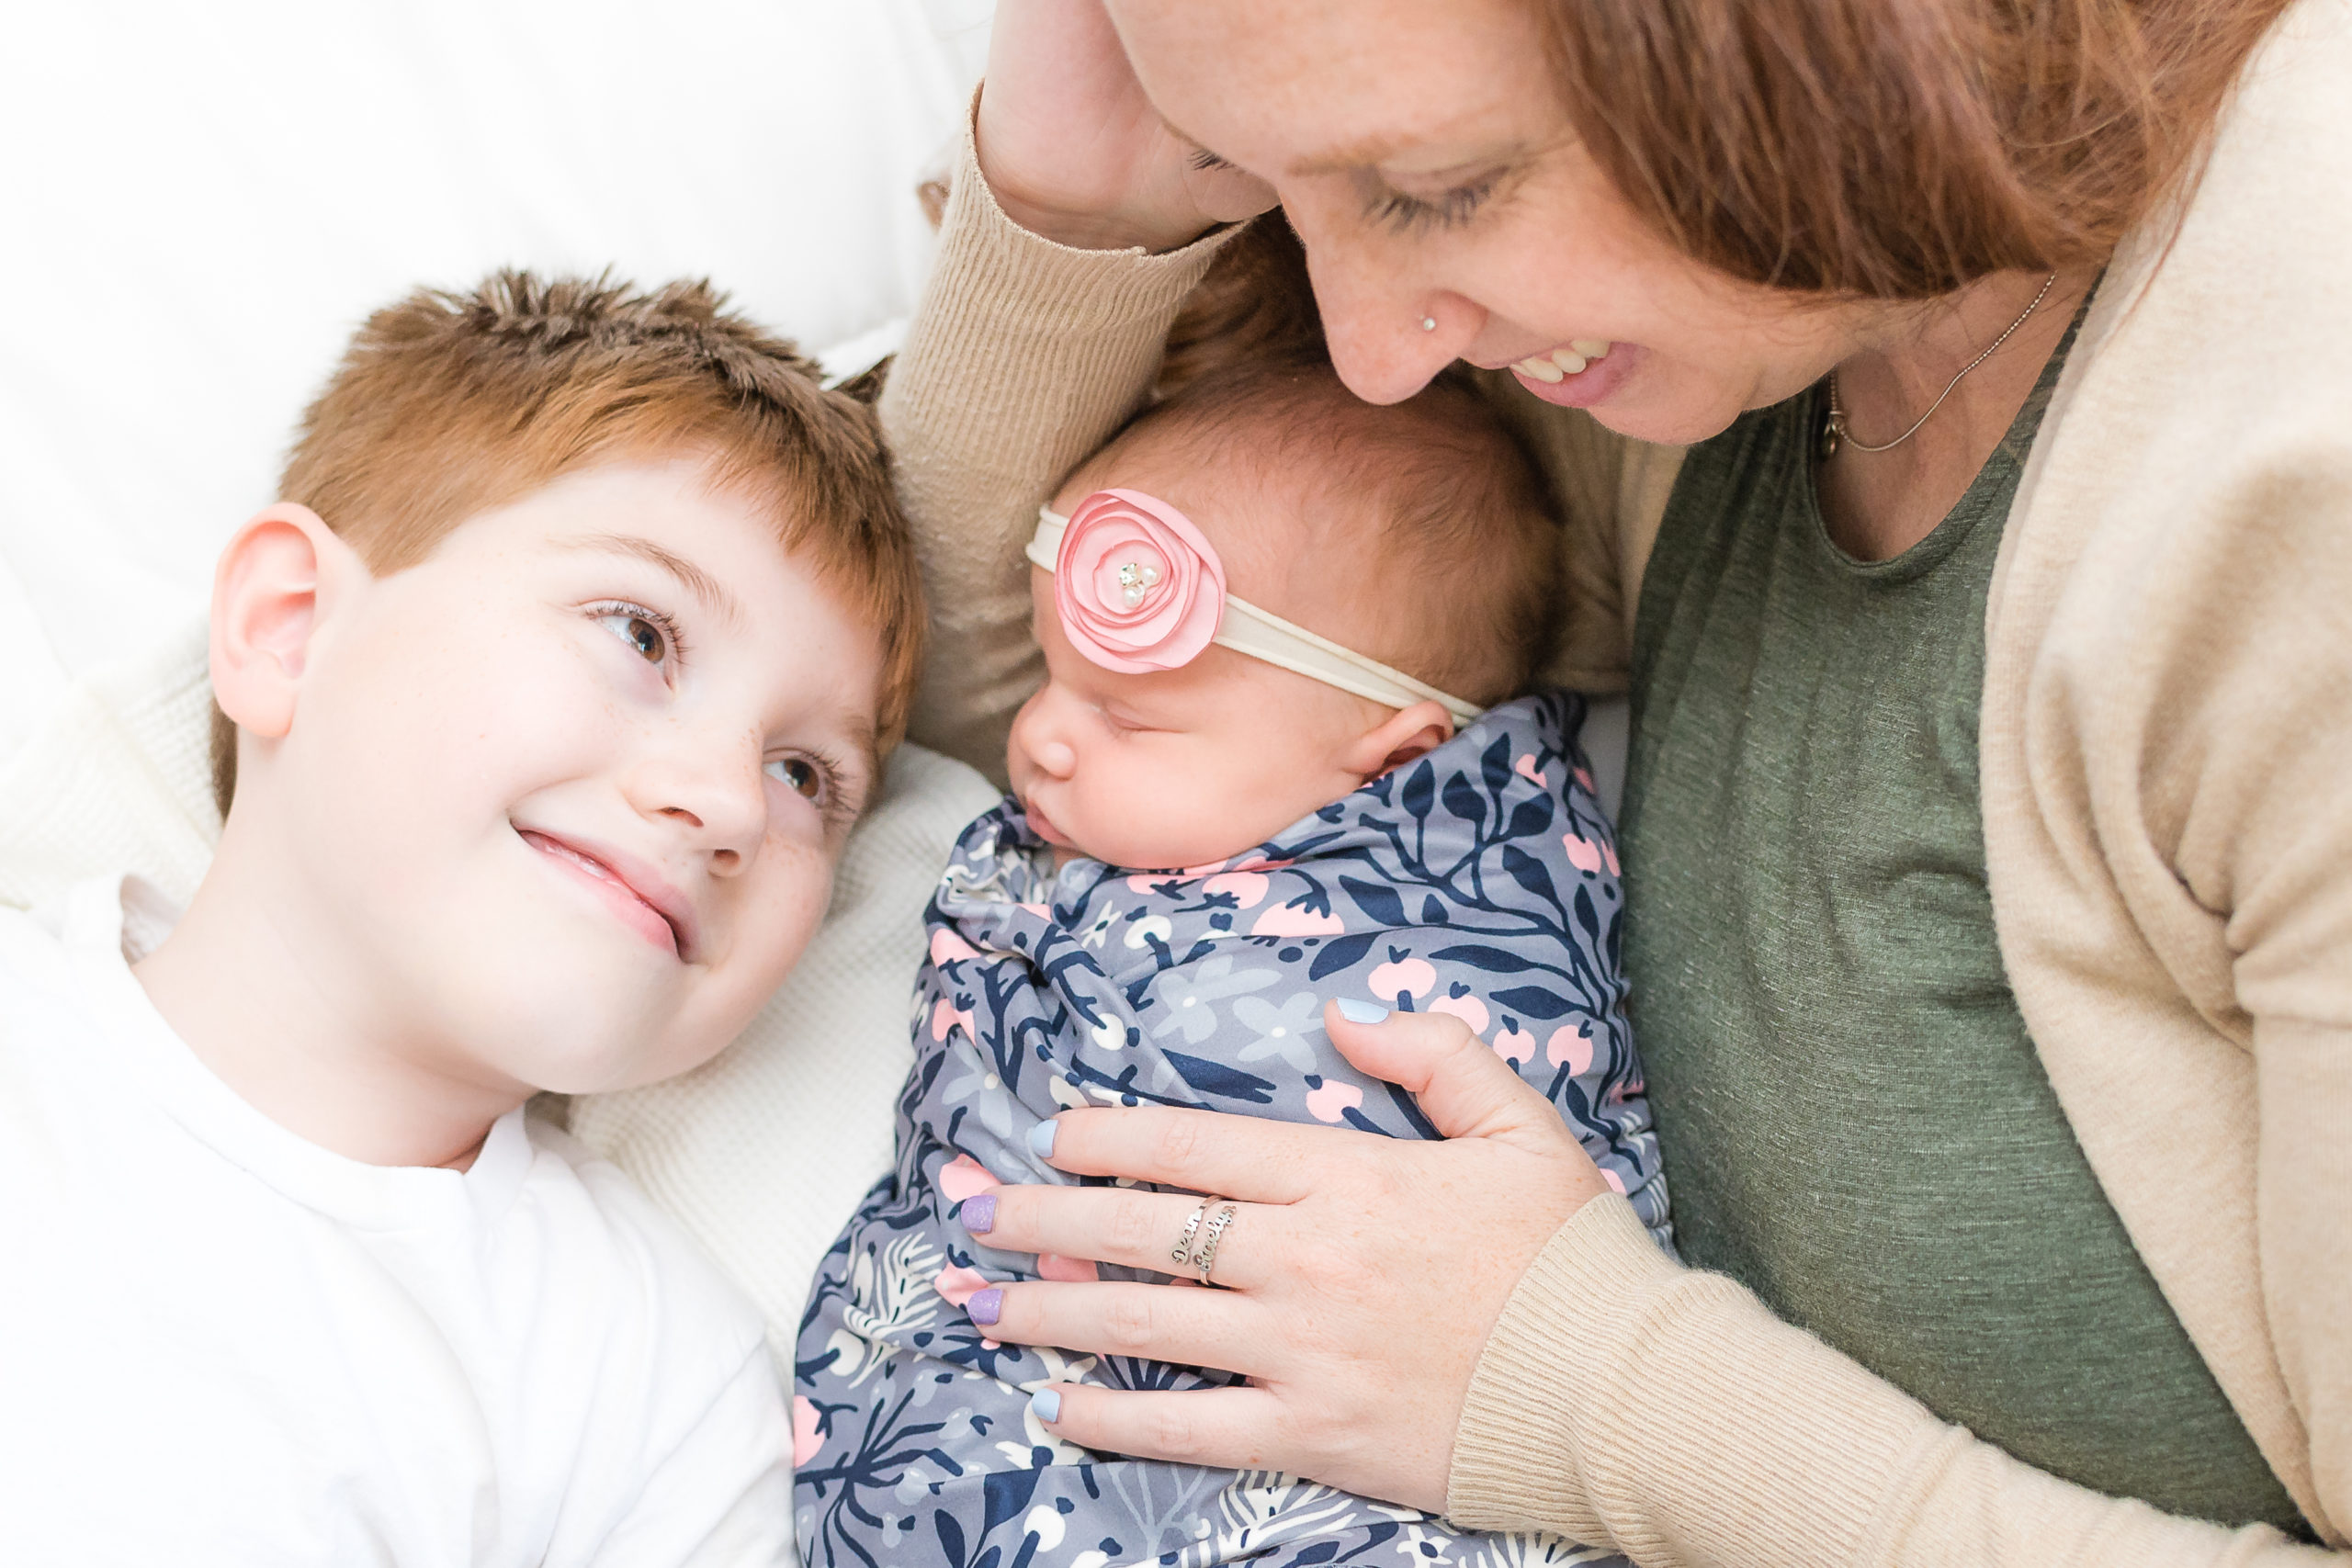 mother, son, and newborn daughter are laying on the bed during mommy and me lifestyle newborn session. son is looking up at mother smiling while mother is looking down at her two children.